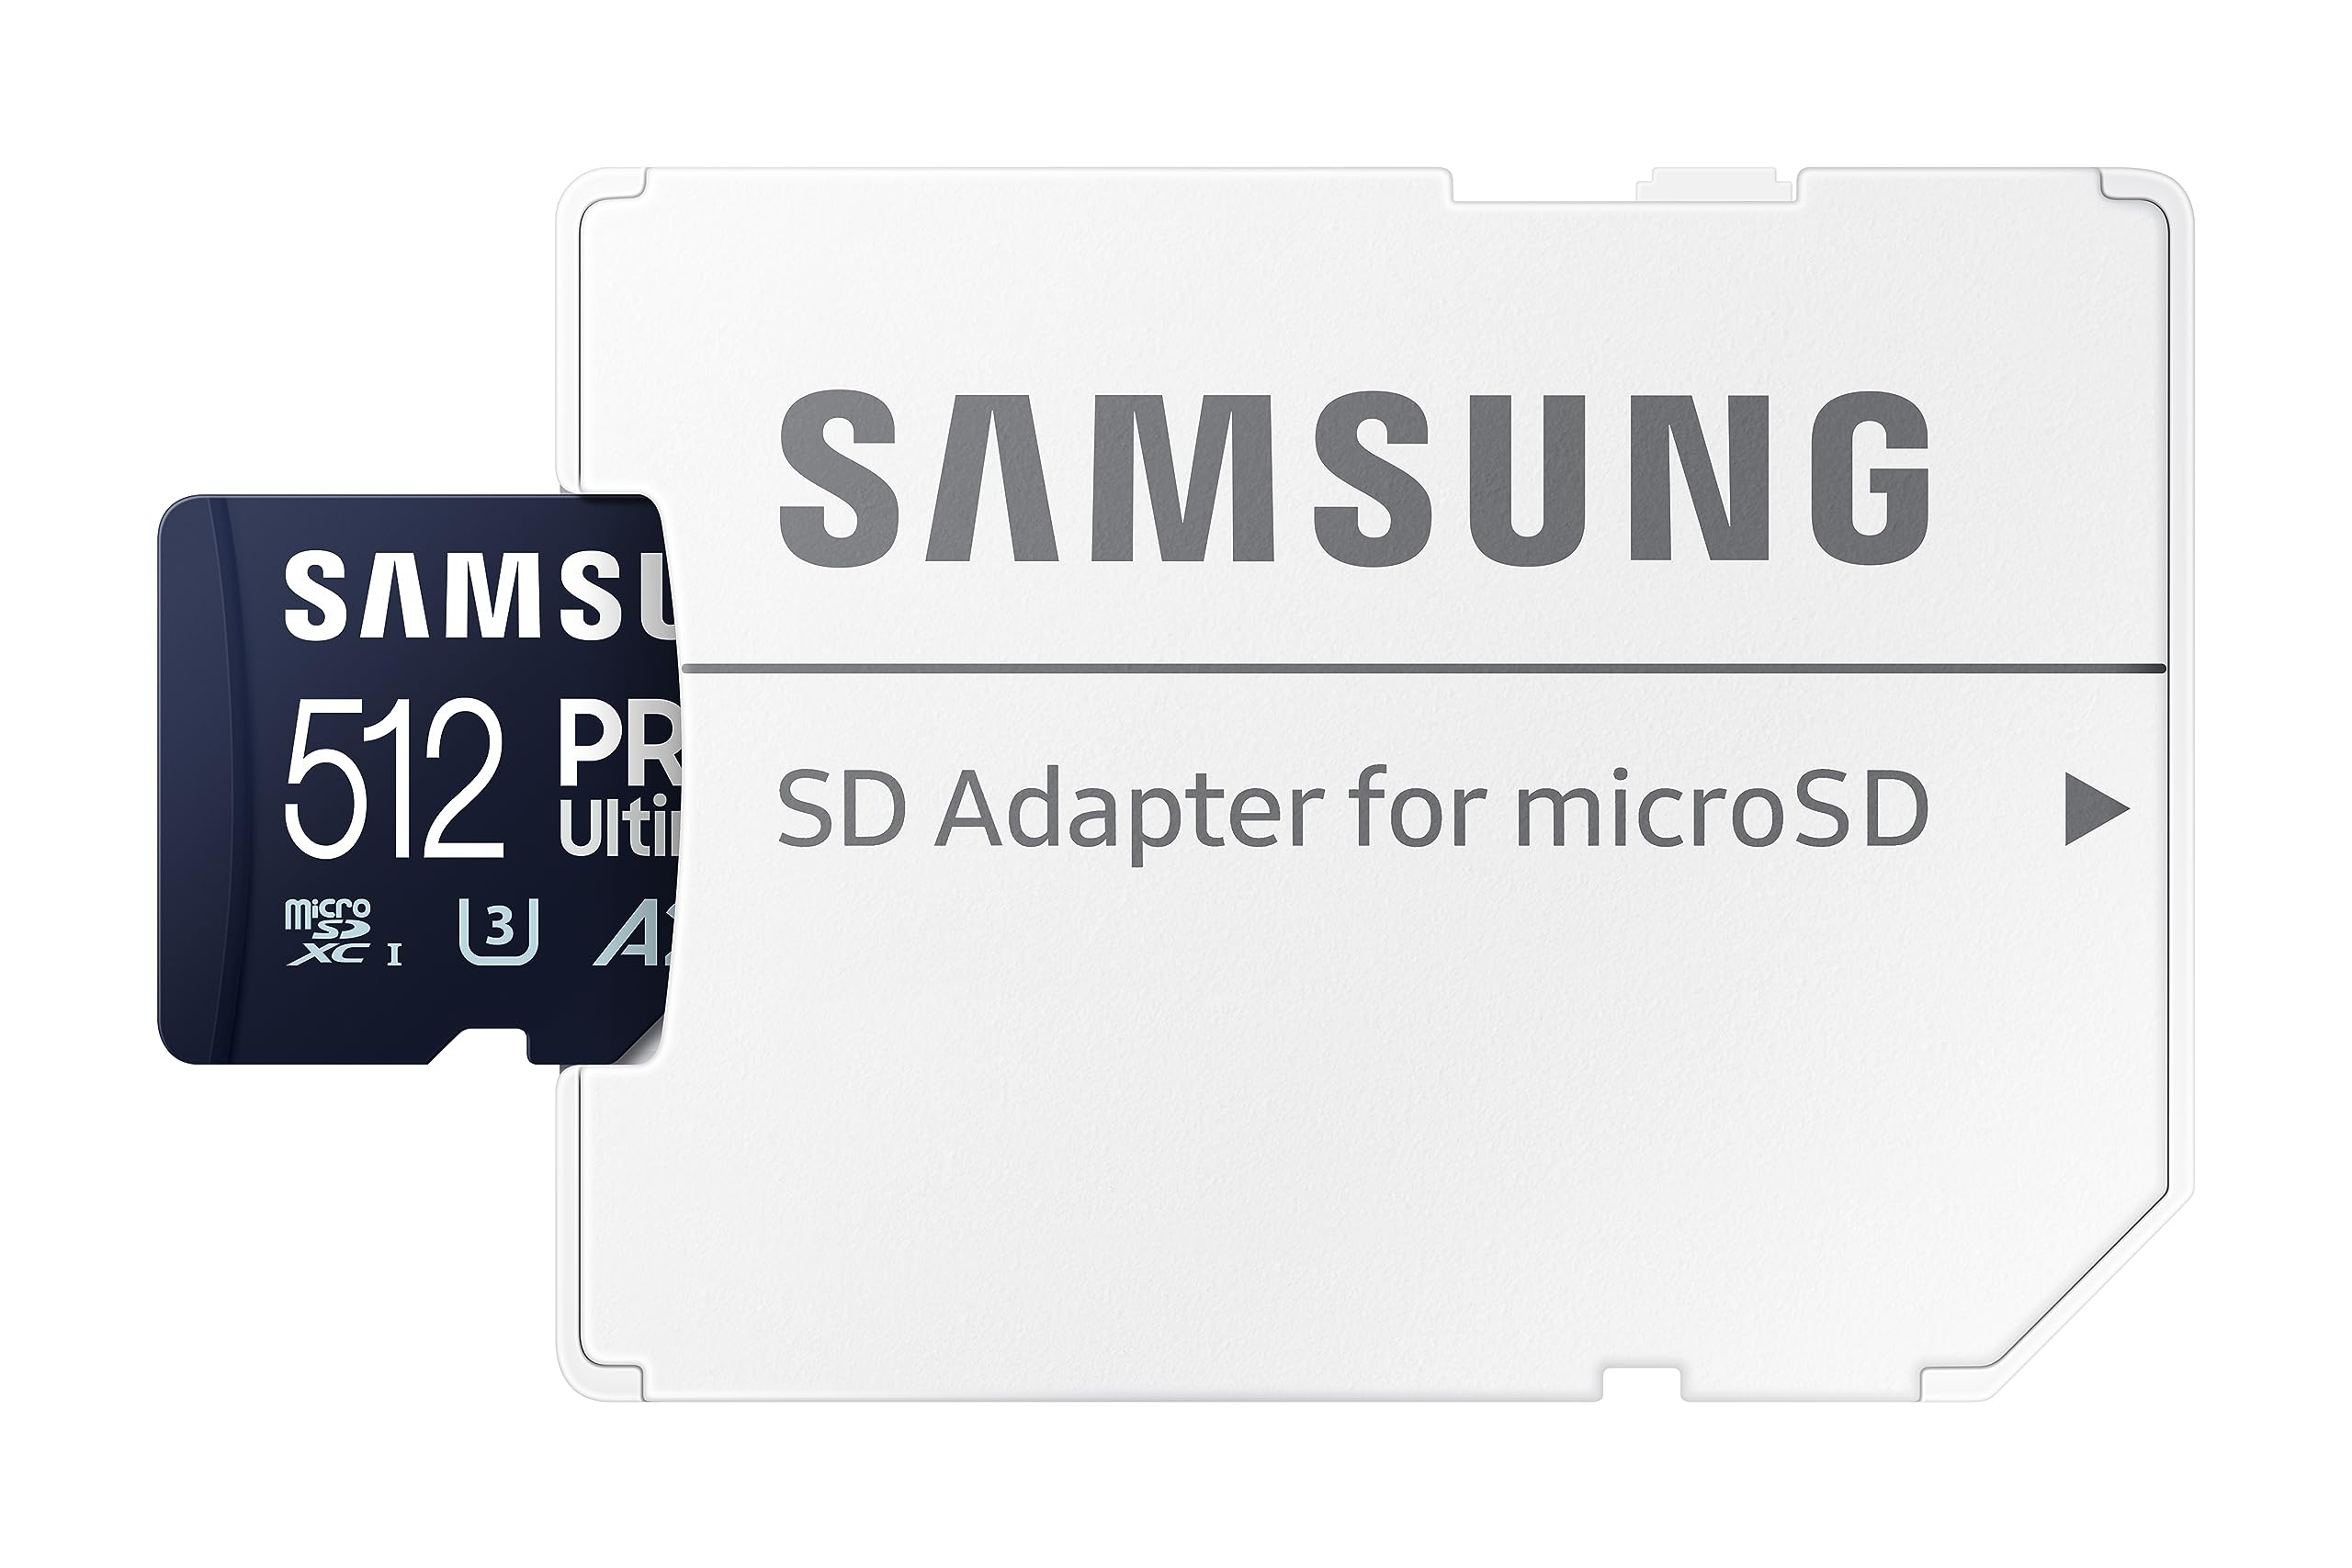 SAMSUNG PRO Ultimate microSD Memory Card + Adapter, 512GB microSDXC, Up to 200 MB/s, 4K UHD, UHS-I, Class 10, U3,V30, A2 for GoPRO Action Cam, DJI Drone, Gaming, Phones, Tablets, MB-MY512SA/AM